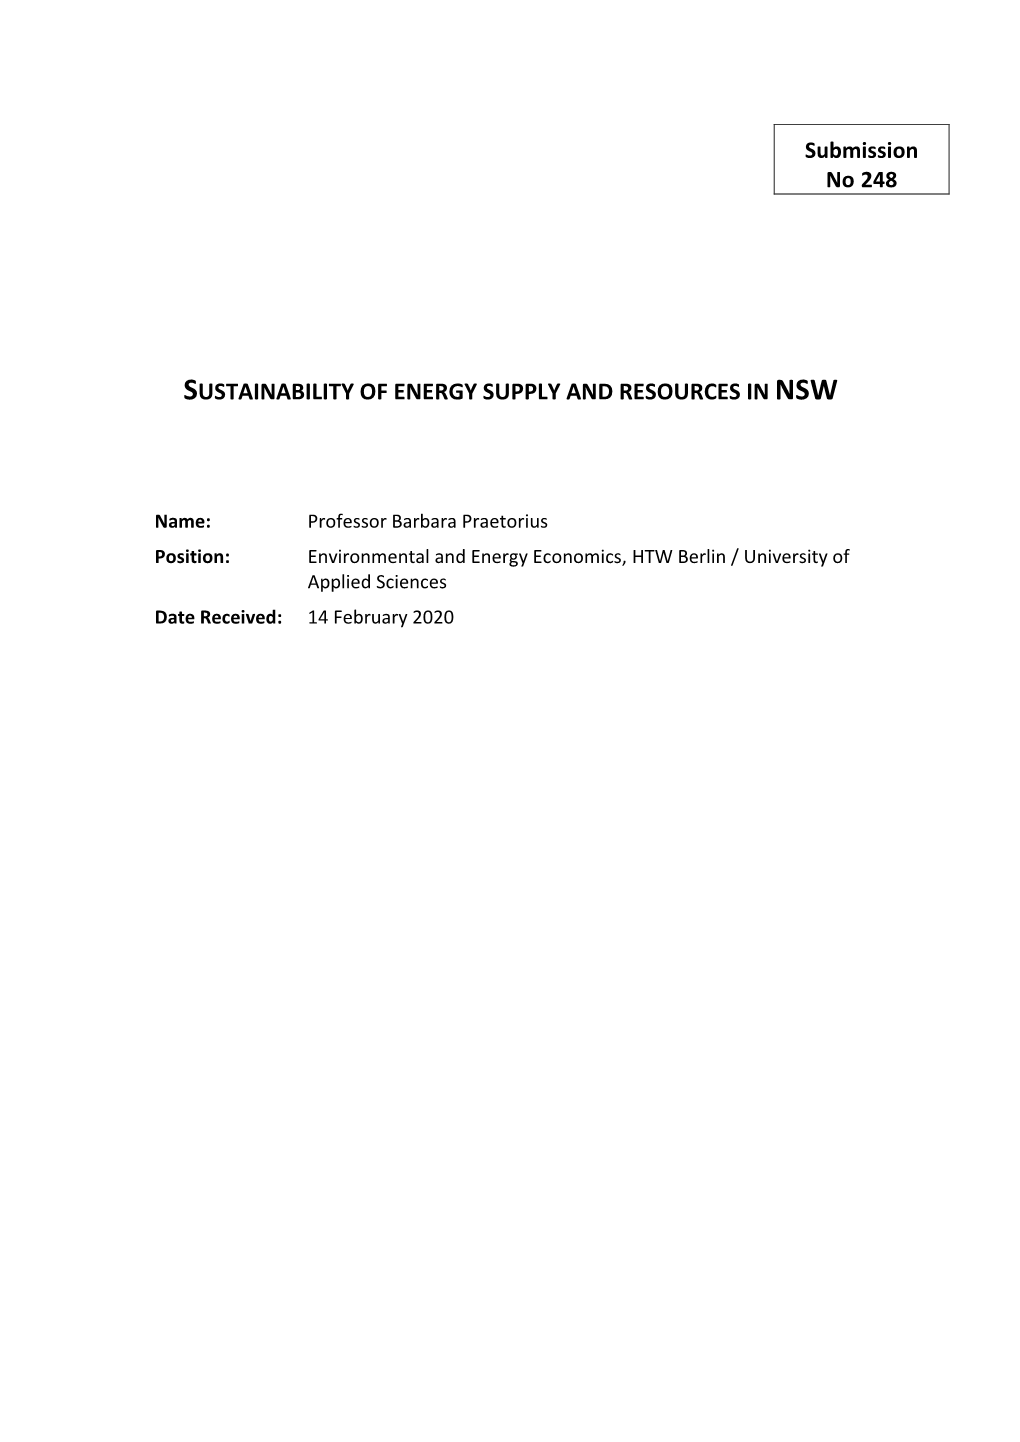 Submission No 248 SUSTAINABILITY of ENERGY SUPPLY AND